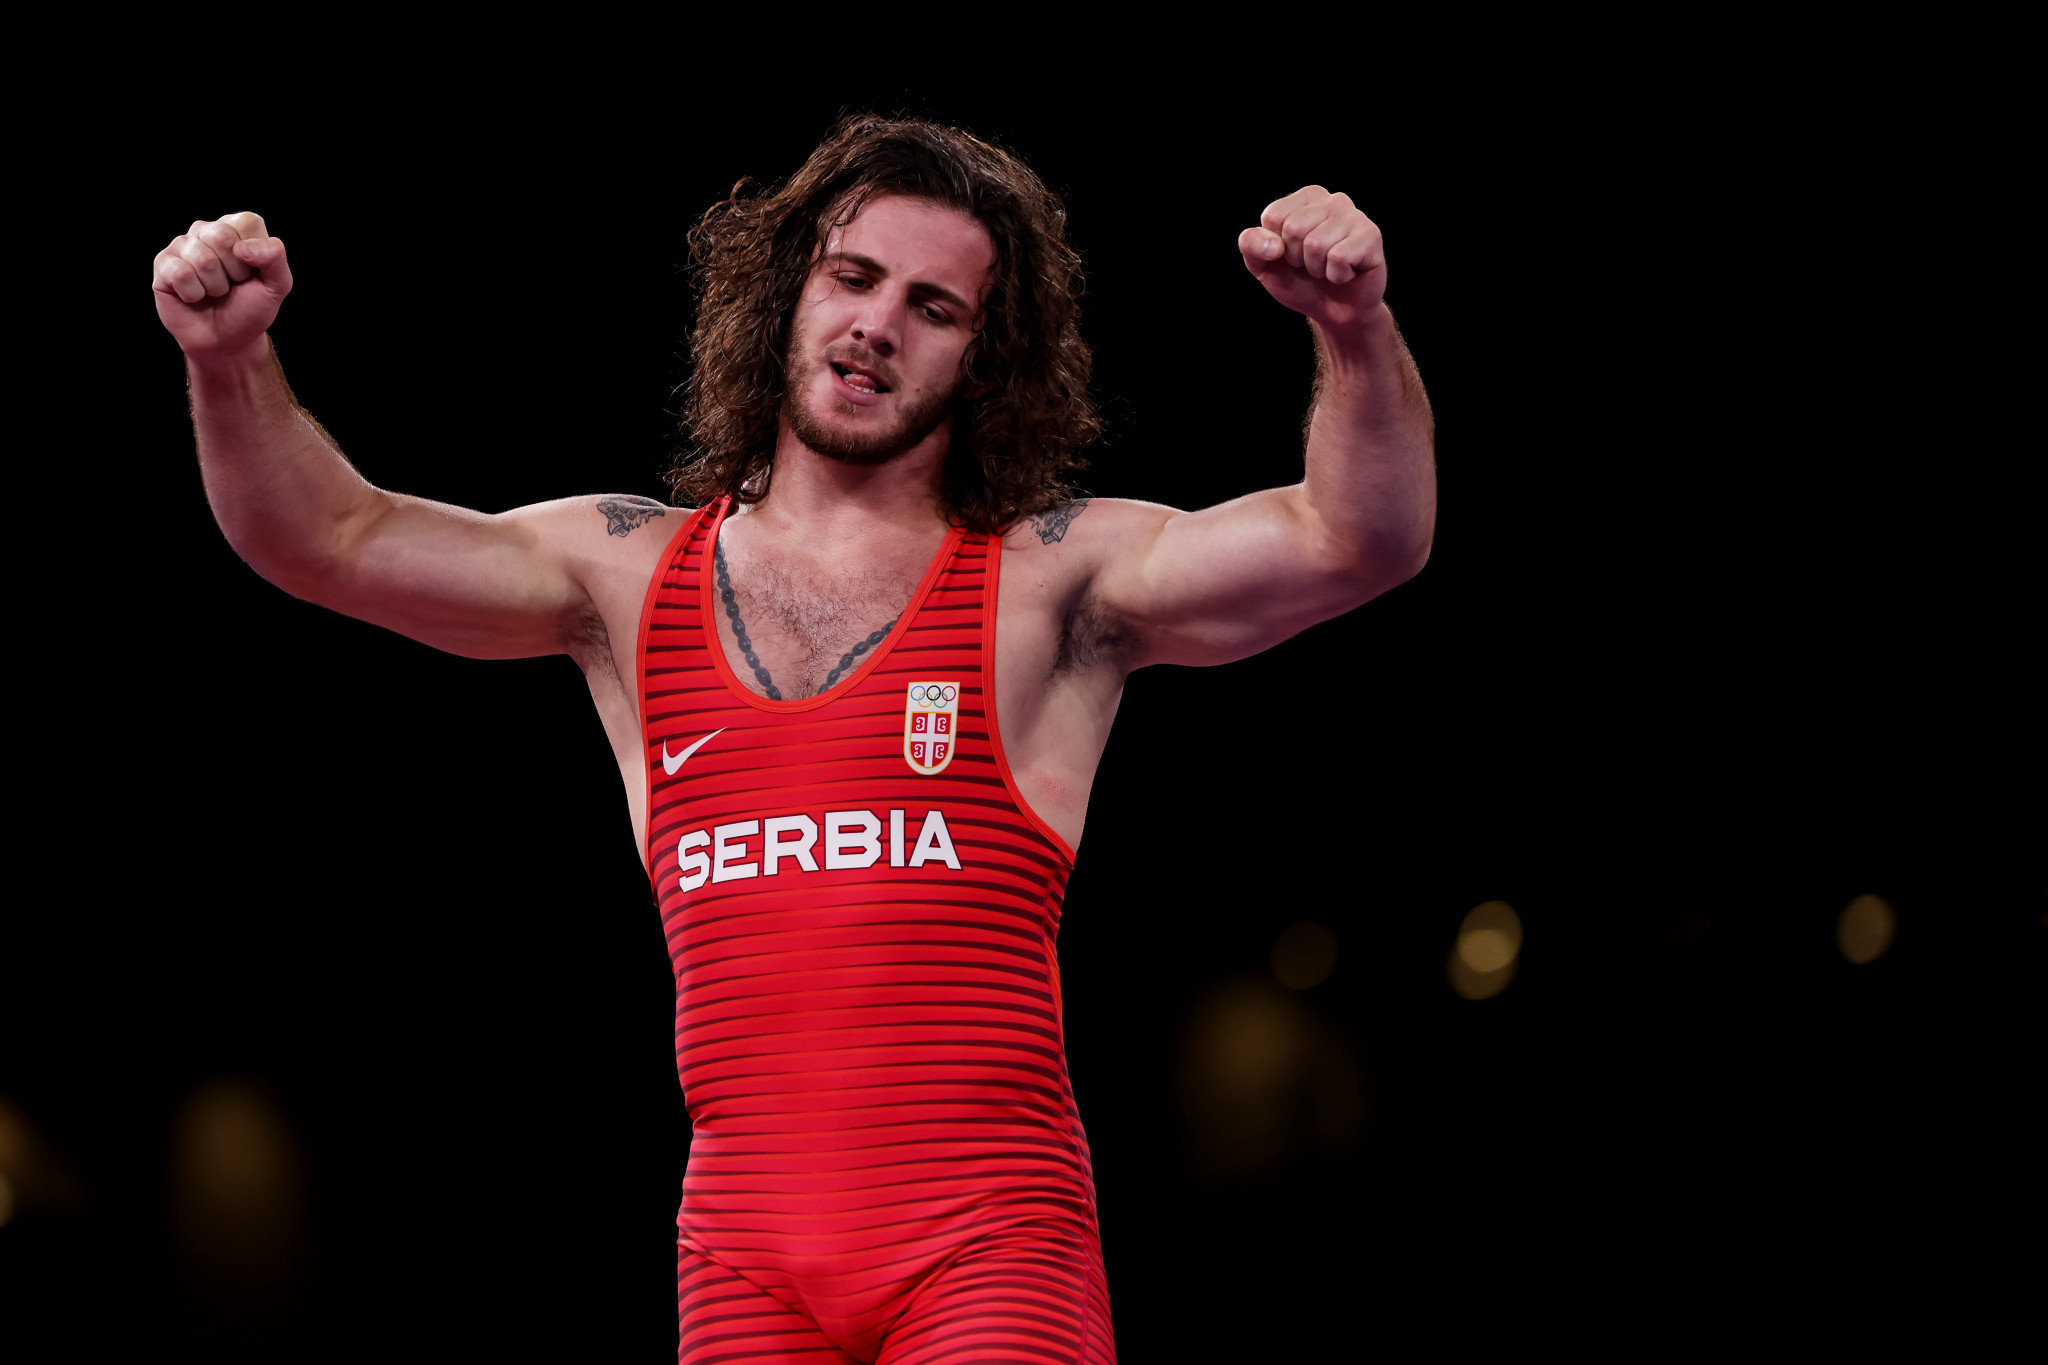 Zurabi Datunashvili was one of two Serbian gold medallists at the World Wrestling Championships ©Getty Images